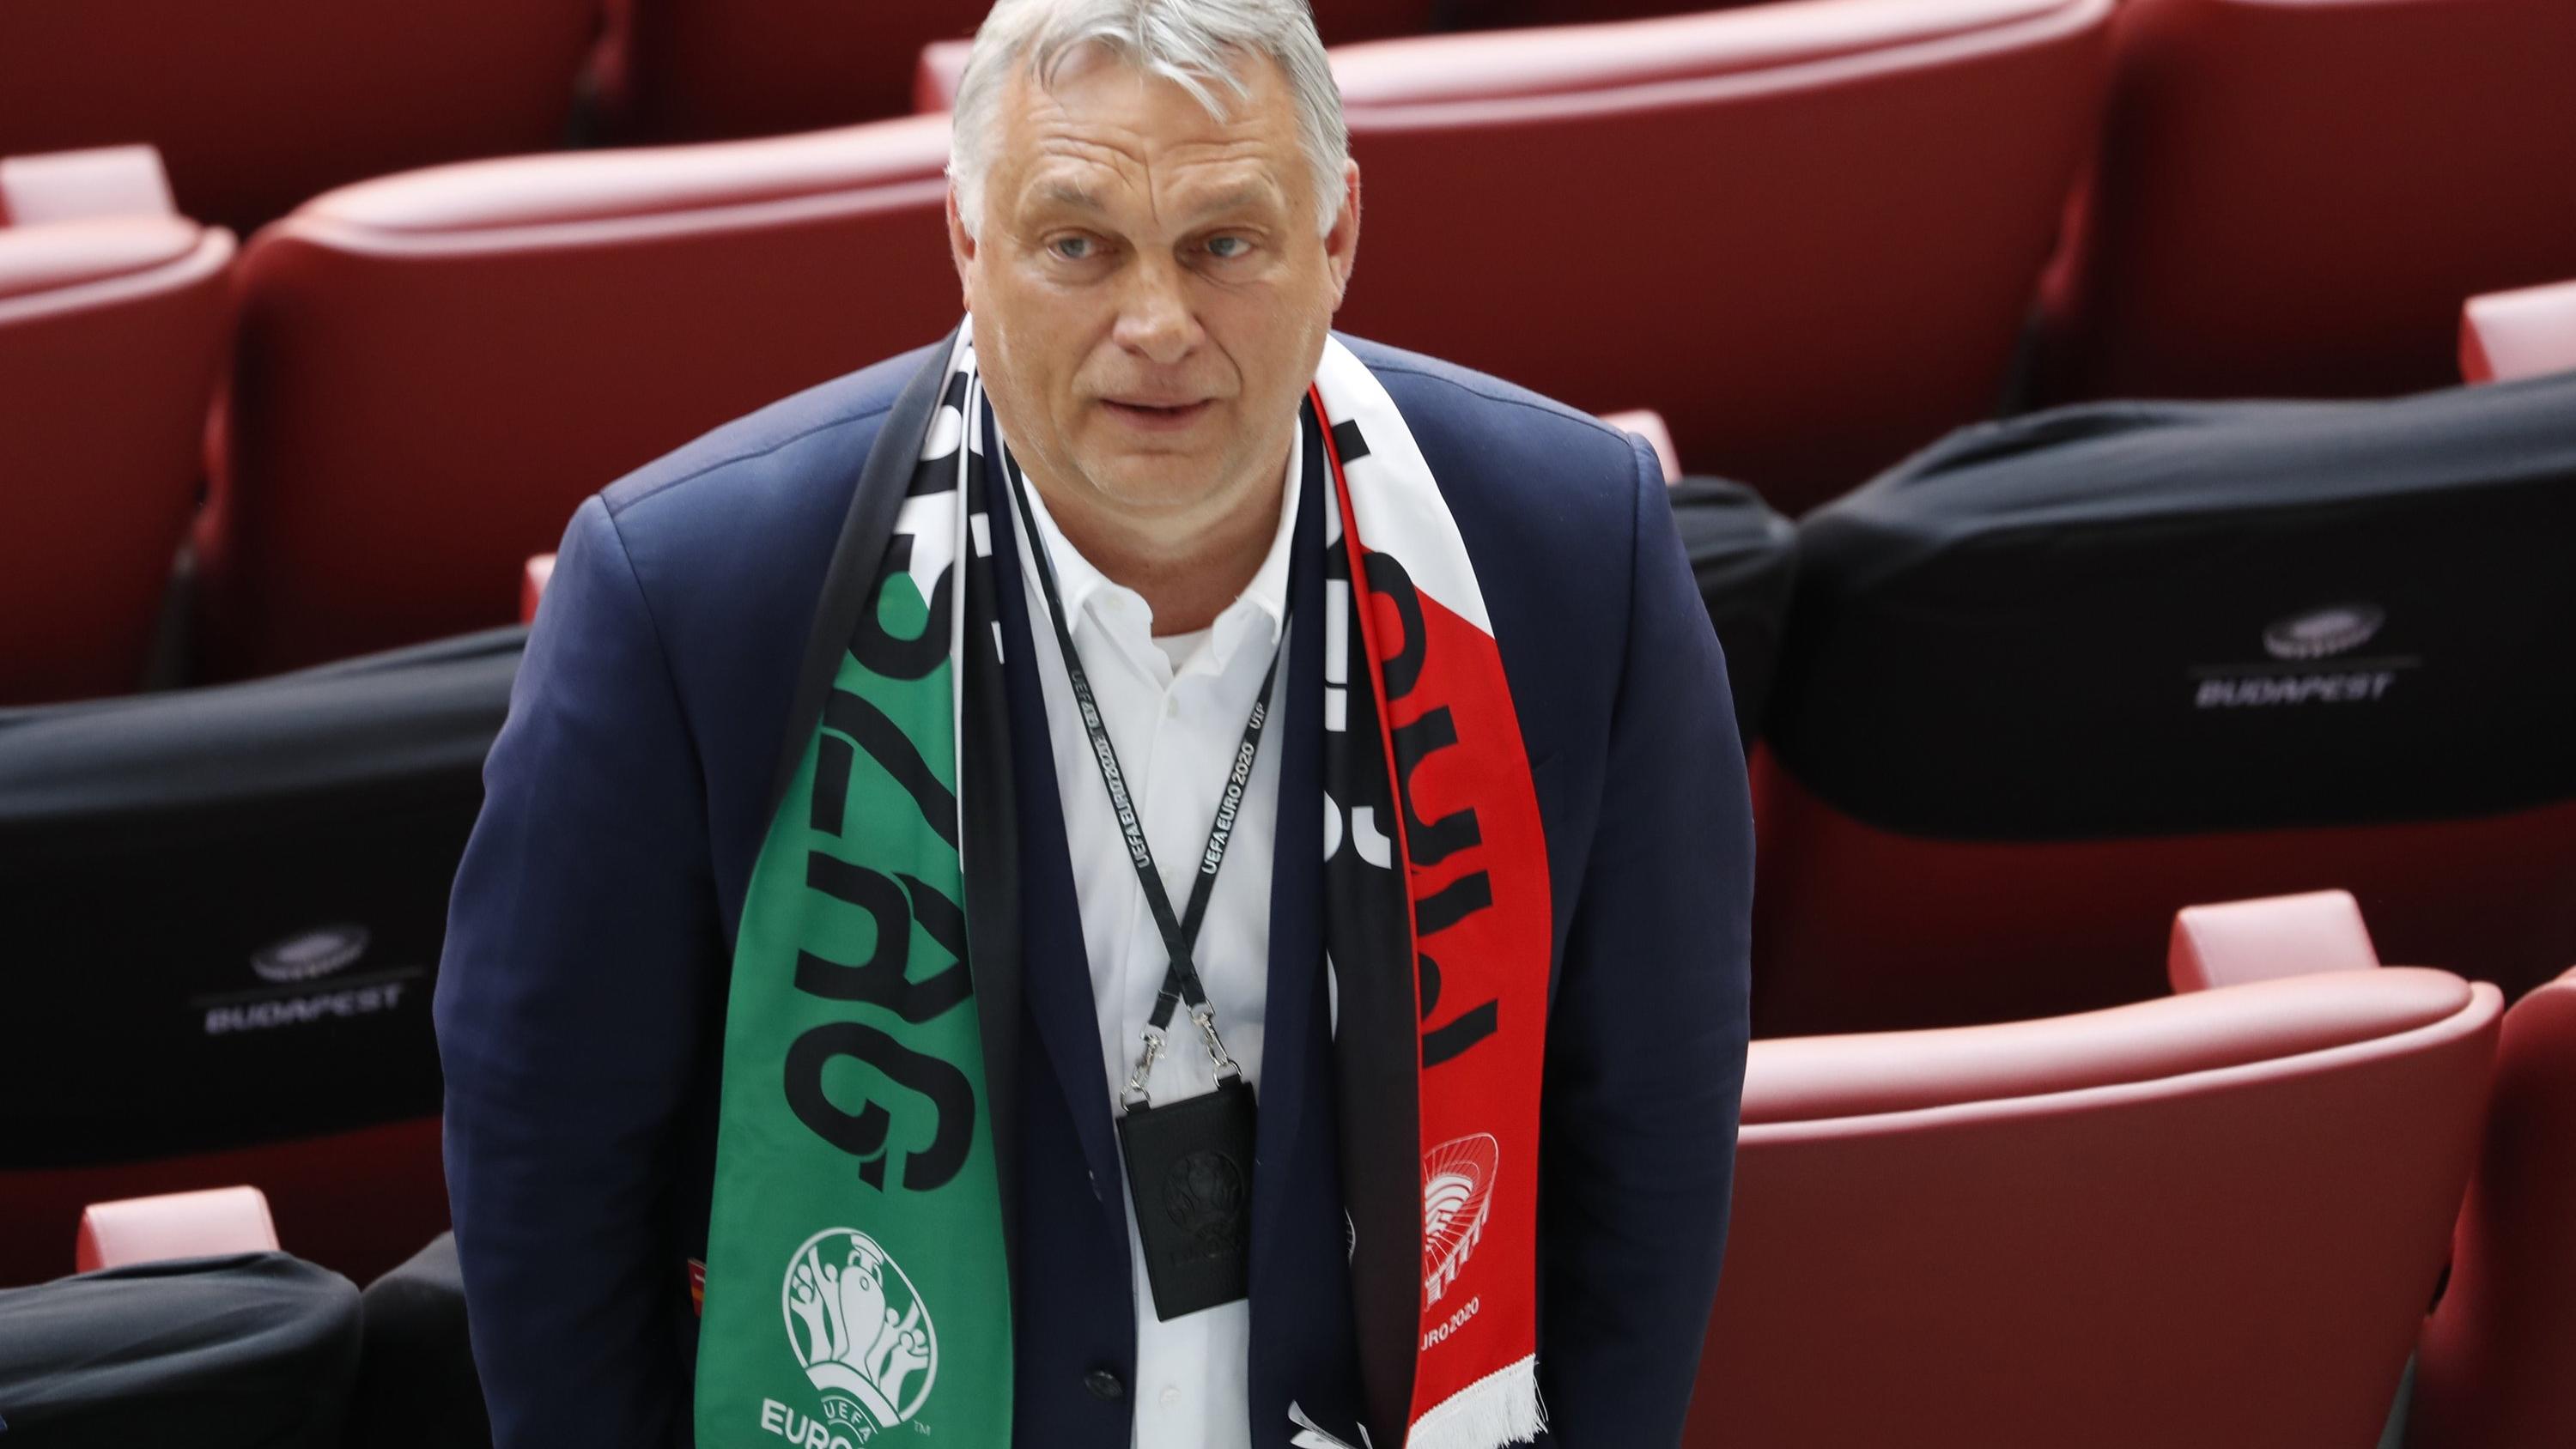 Hungary's Prime Minister Viktor Orban attends the Euro 2020 soccer championship group F match between Hungary and Portugal at the Ferenc Puskas stadium in Budapest, Hungary, Tuesday, June 15, 2021. (AP Photo/Laszlo Balogh, Pool)